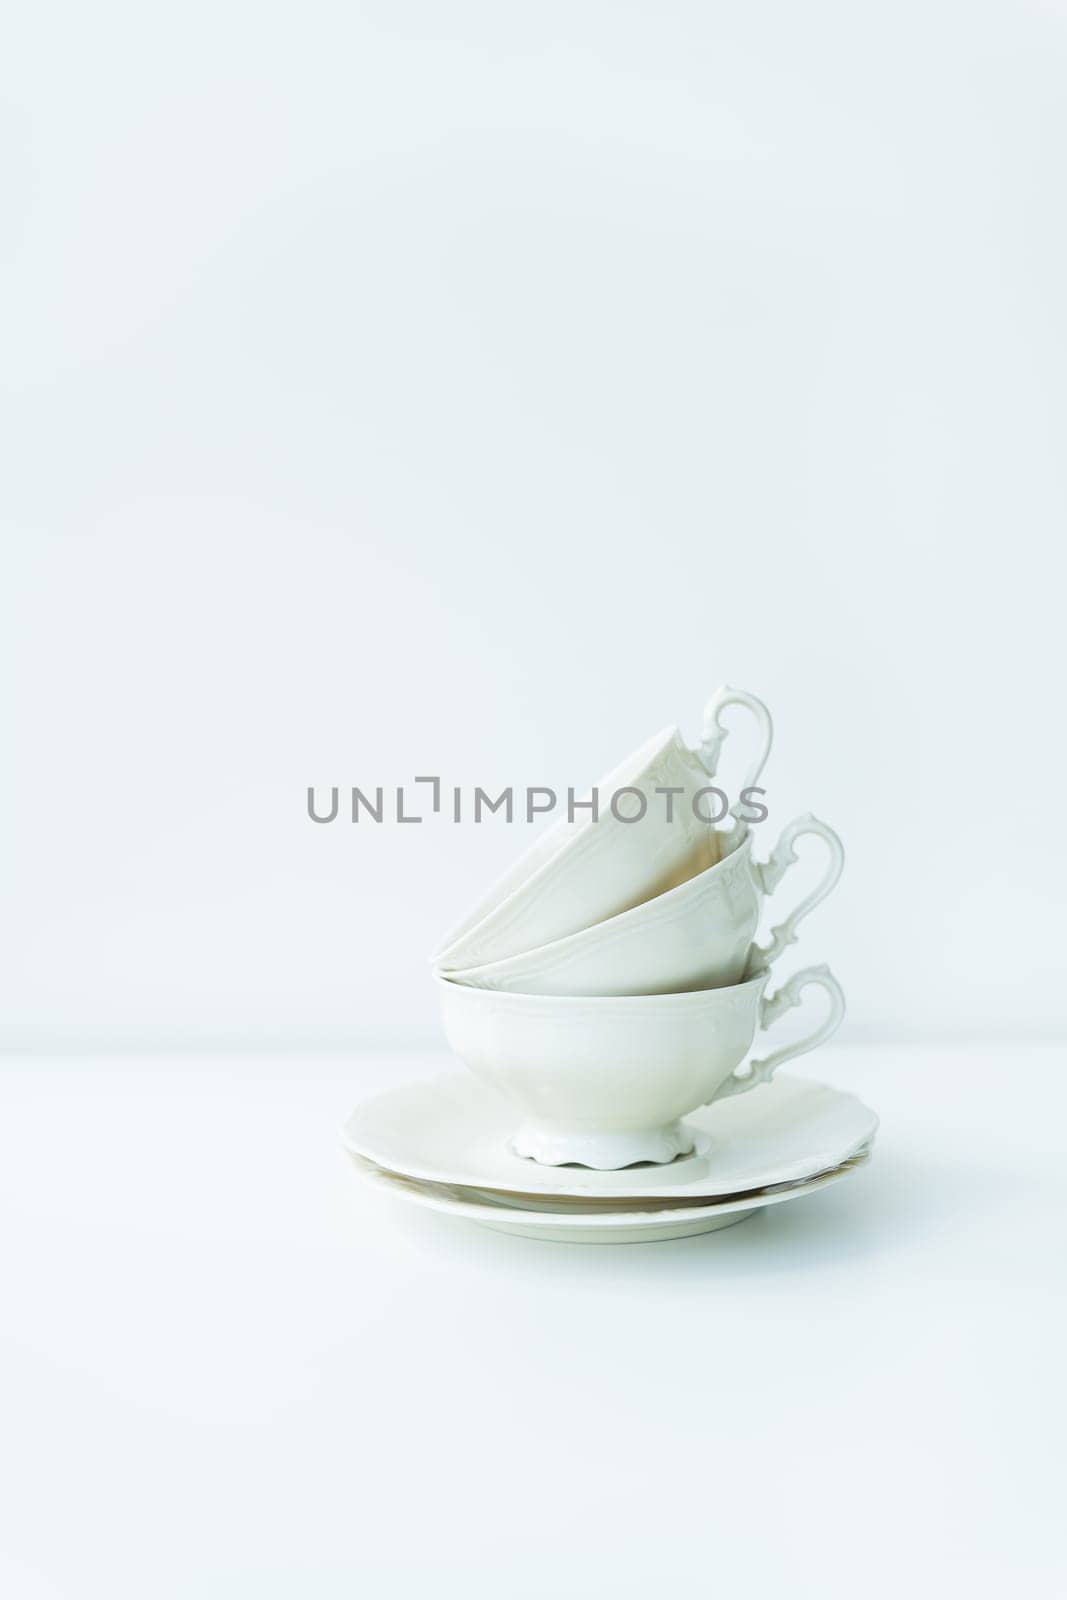 A set of cream porcelain cups with saucers on the table, preparation for the tea ceremony, top view. by sfinks